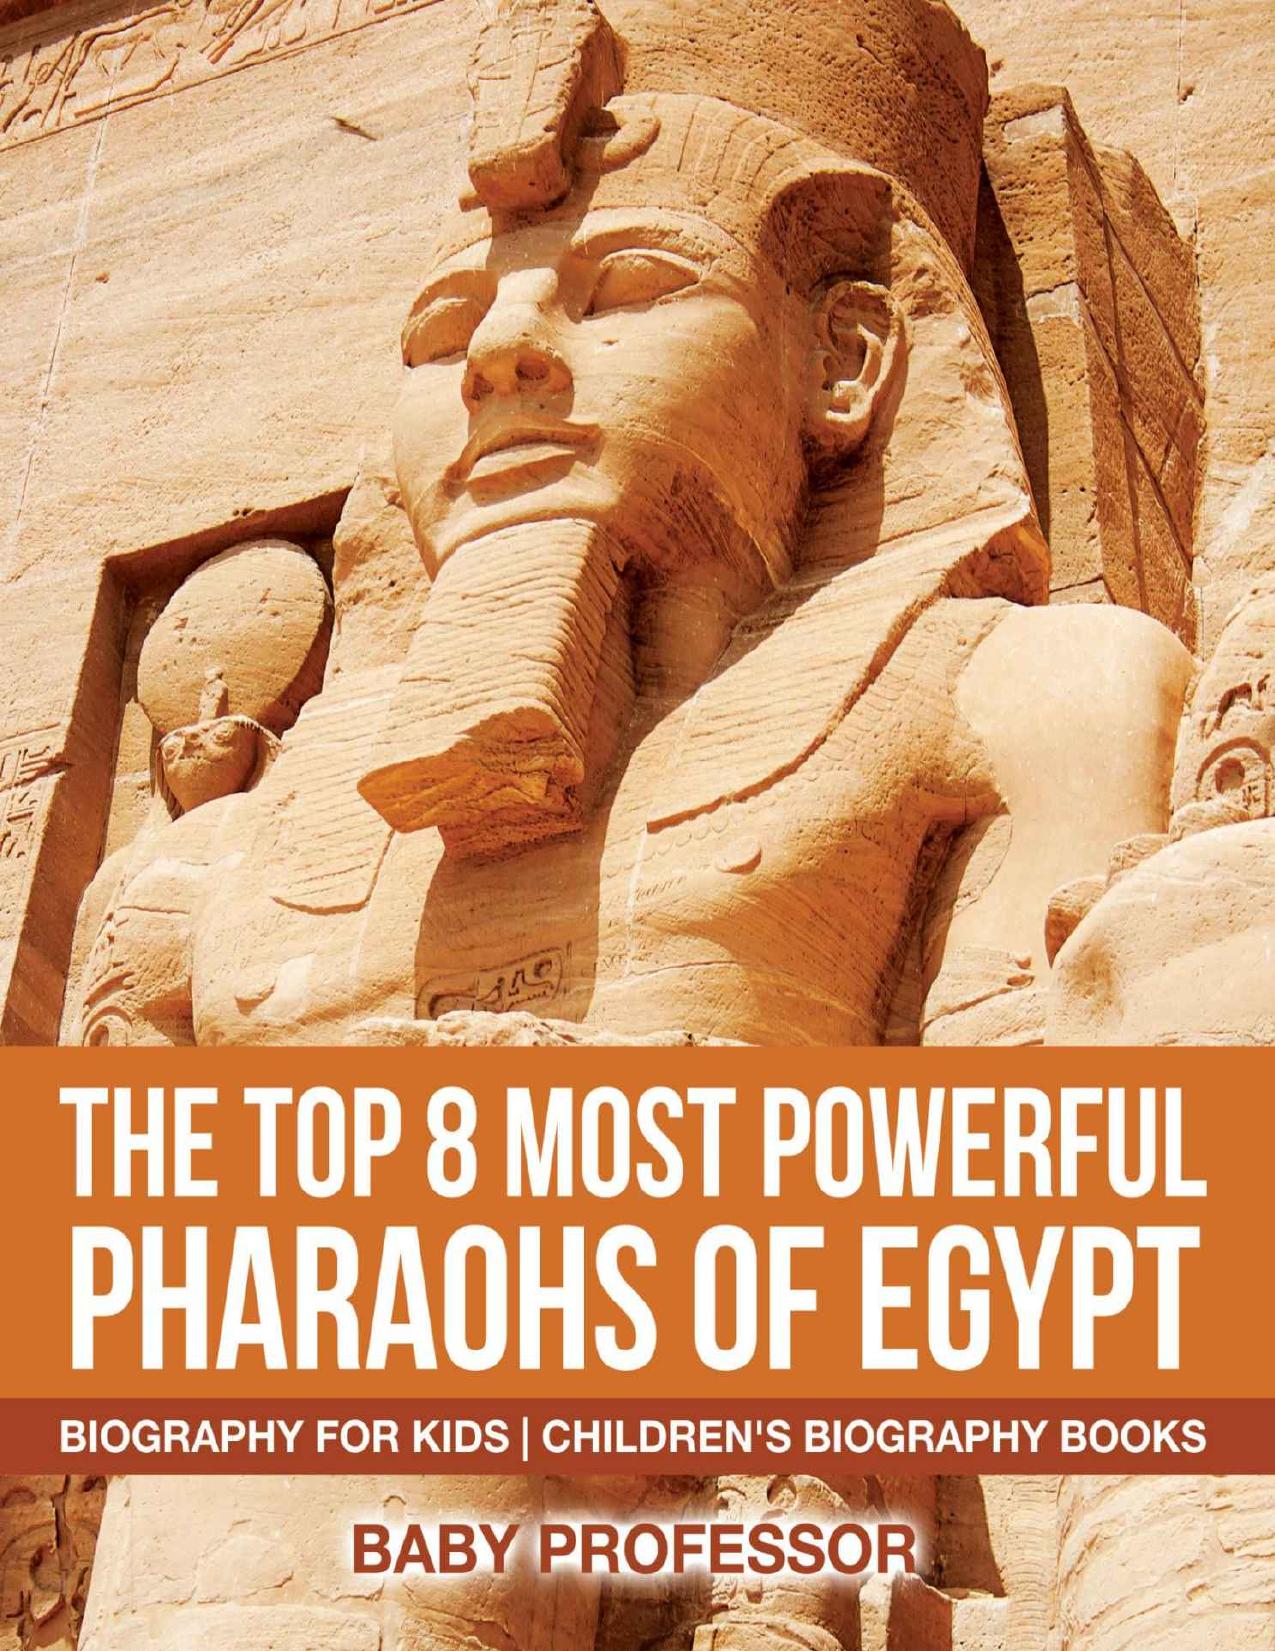 The Top 8 Most Powerful Pharaohs of Egypt - Biography for Kids | Children's Historical Biographies by Baby Professor